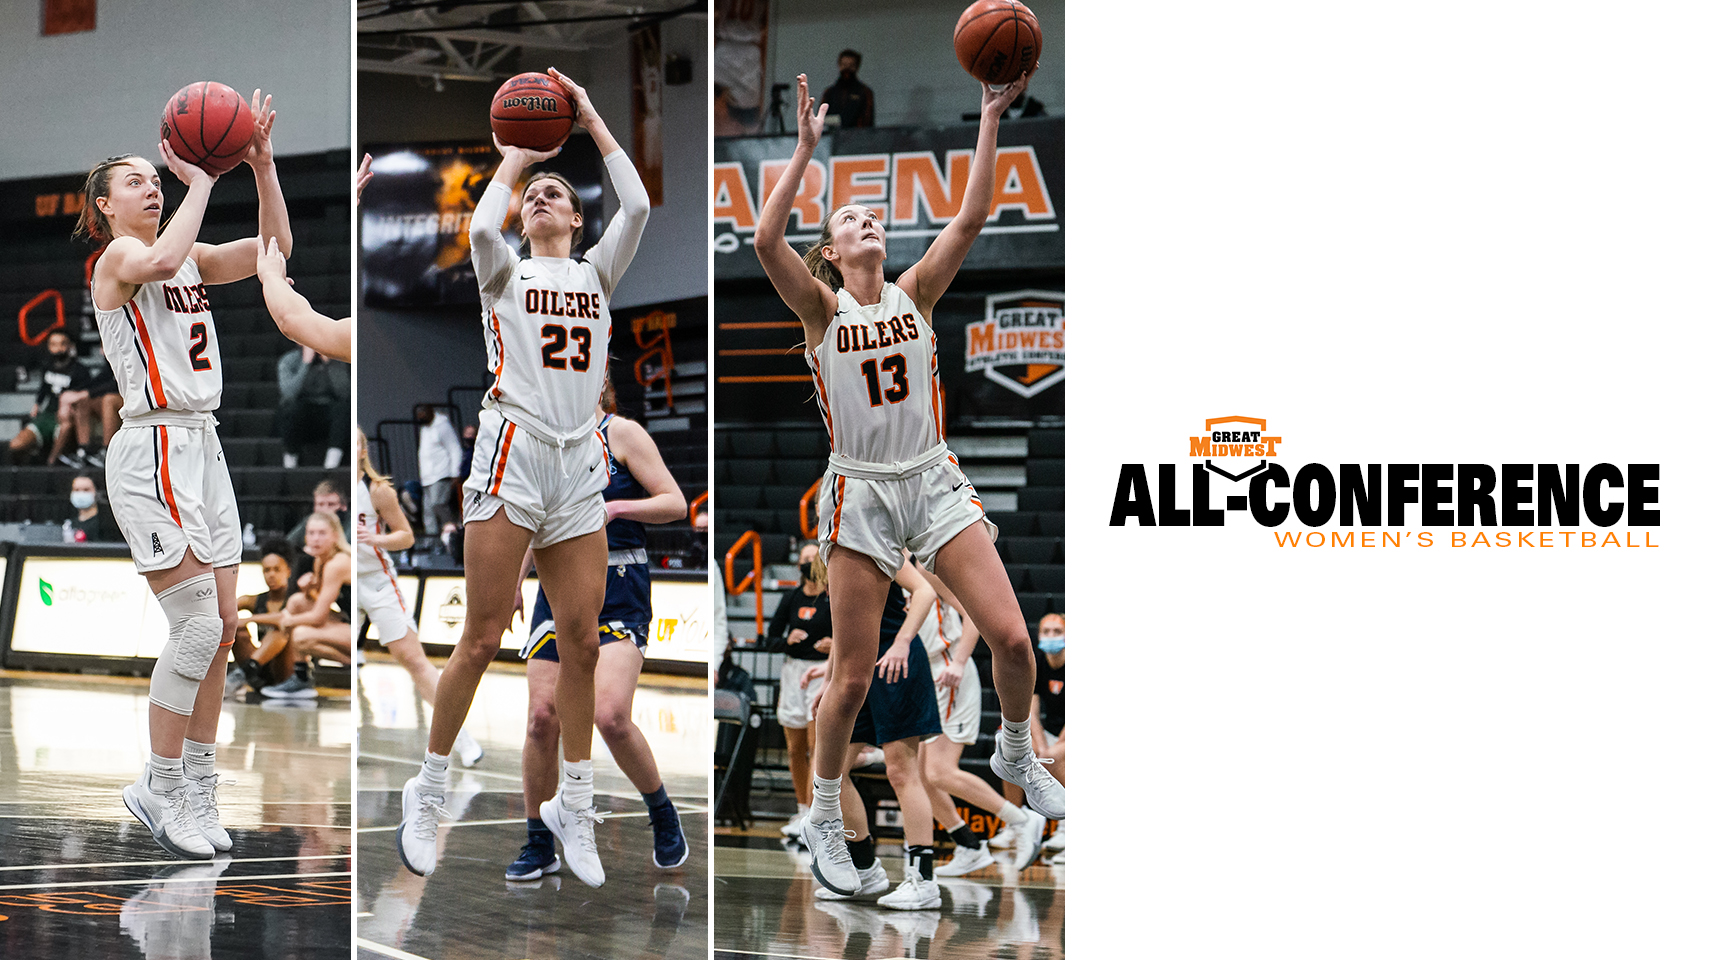 Women's basketball all-conference graphic